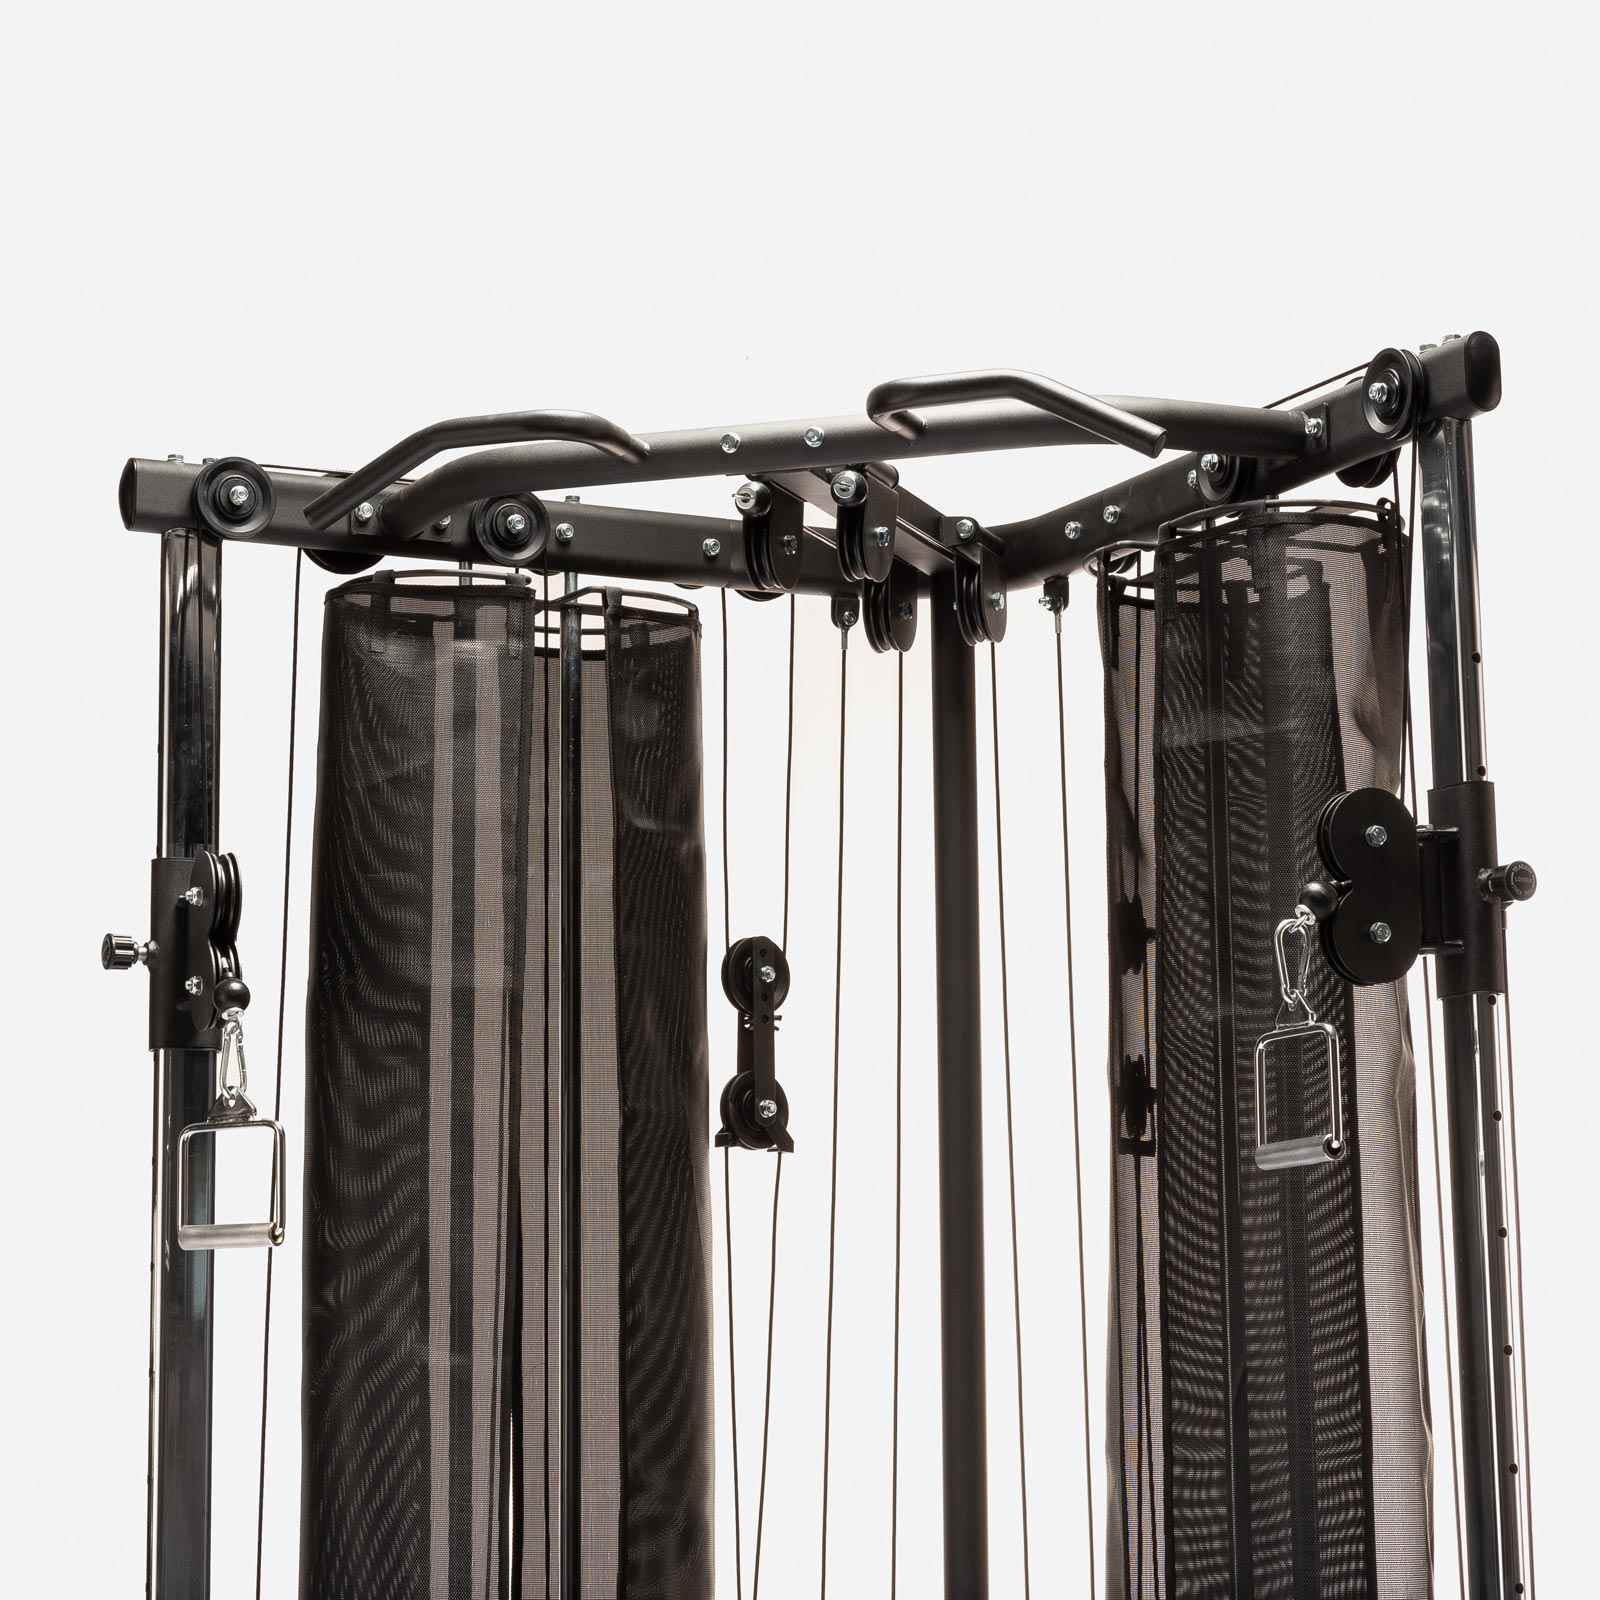 RIVAL FUNCTIONAL TRAINER